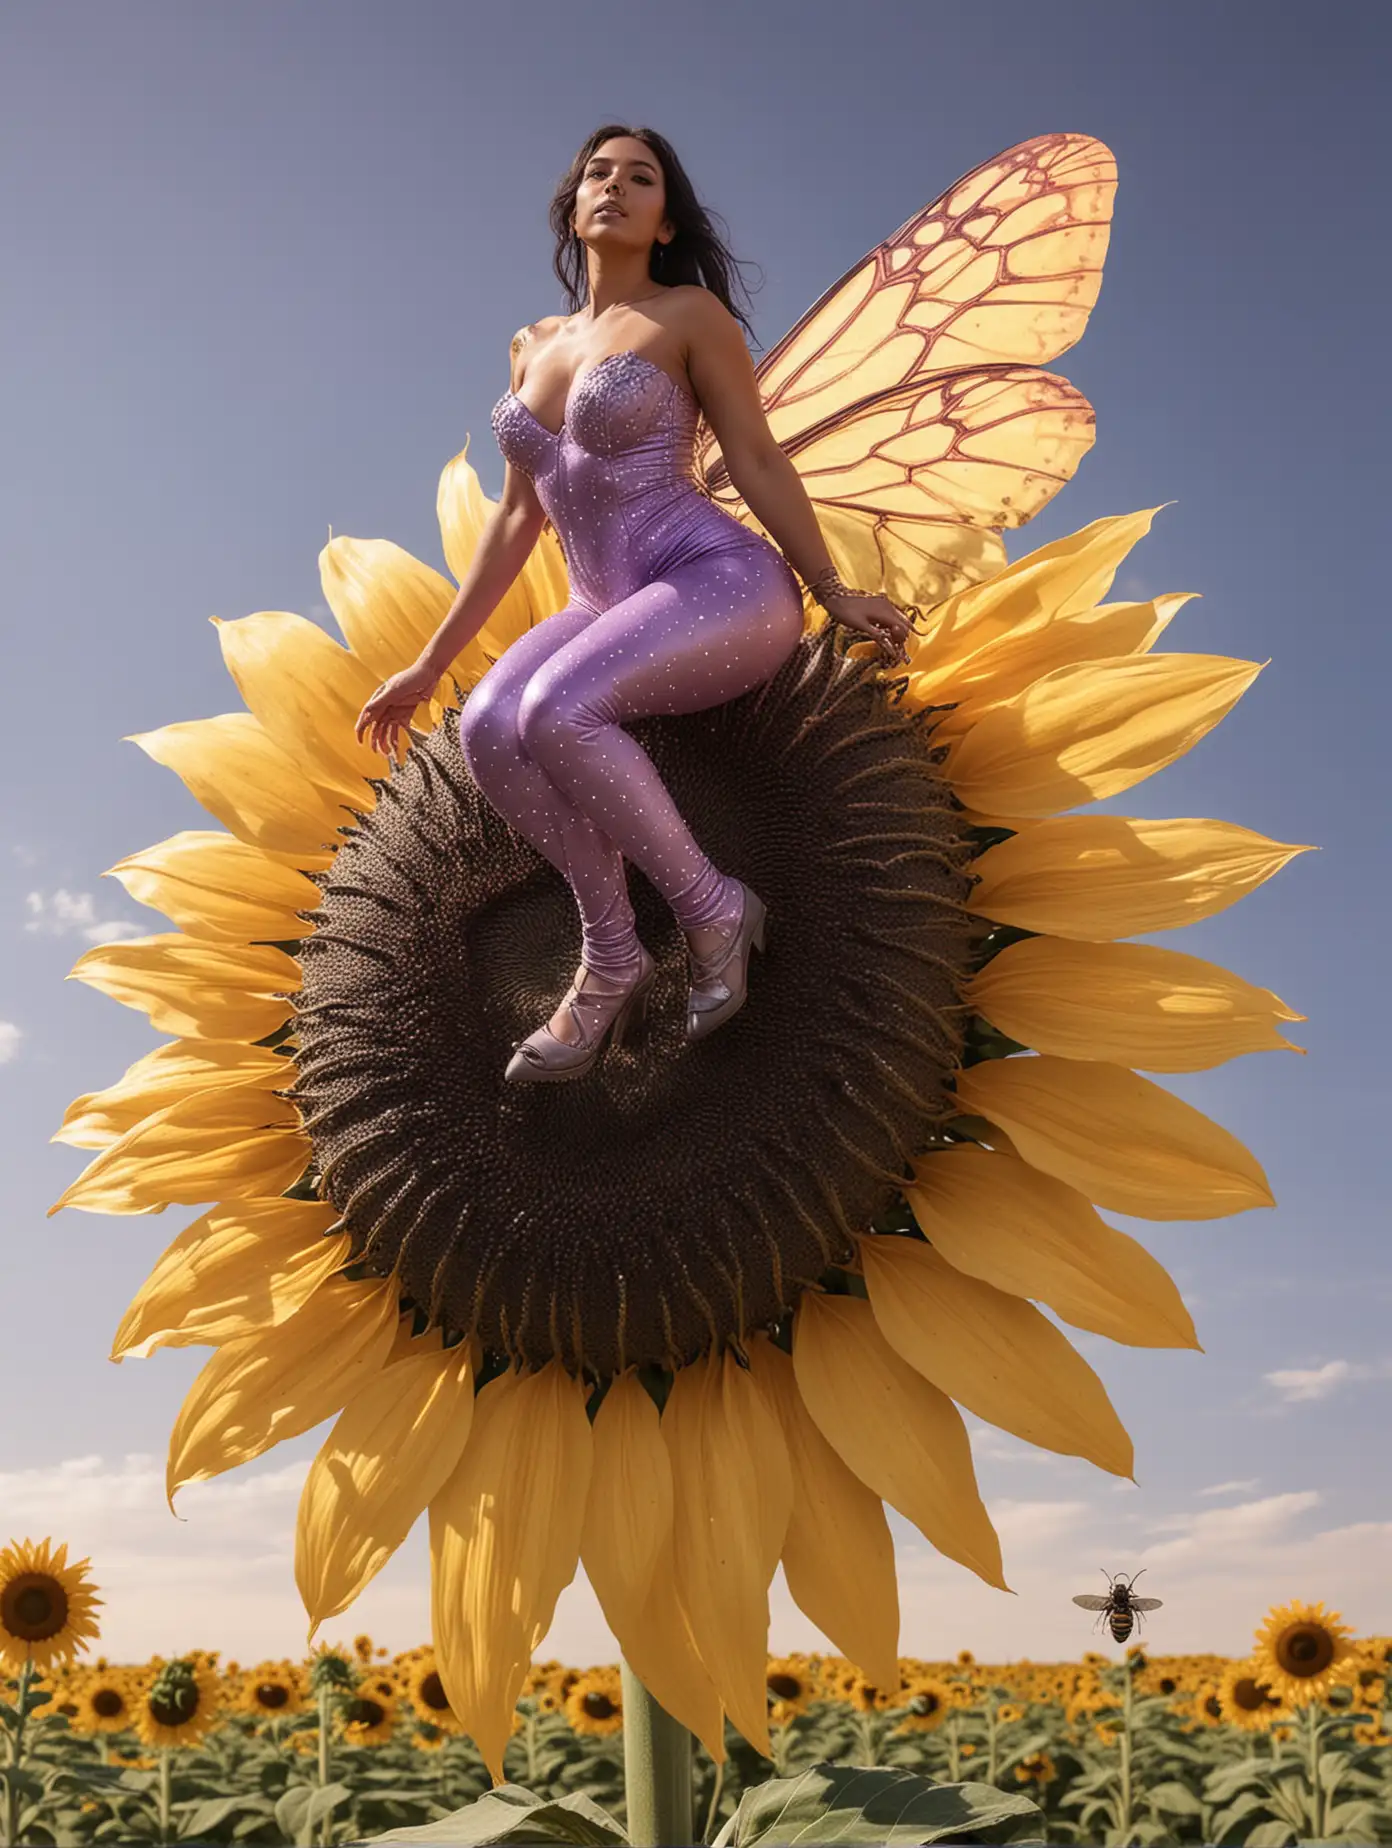 Full body. Latina woman, body painted in light purple, riding a gigantic bee, gigantic sunflower. 